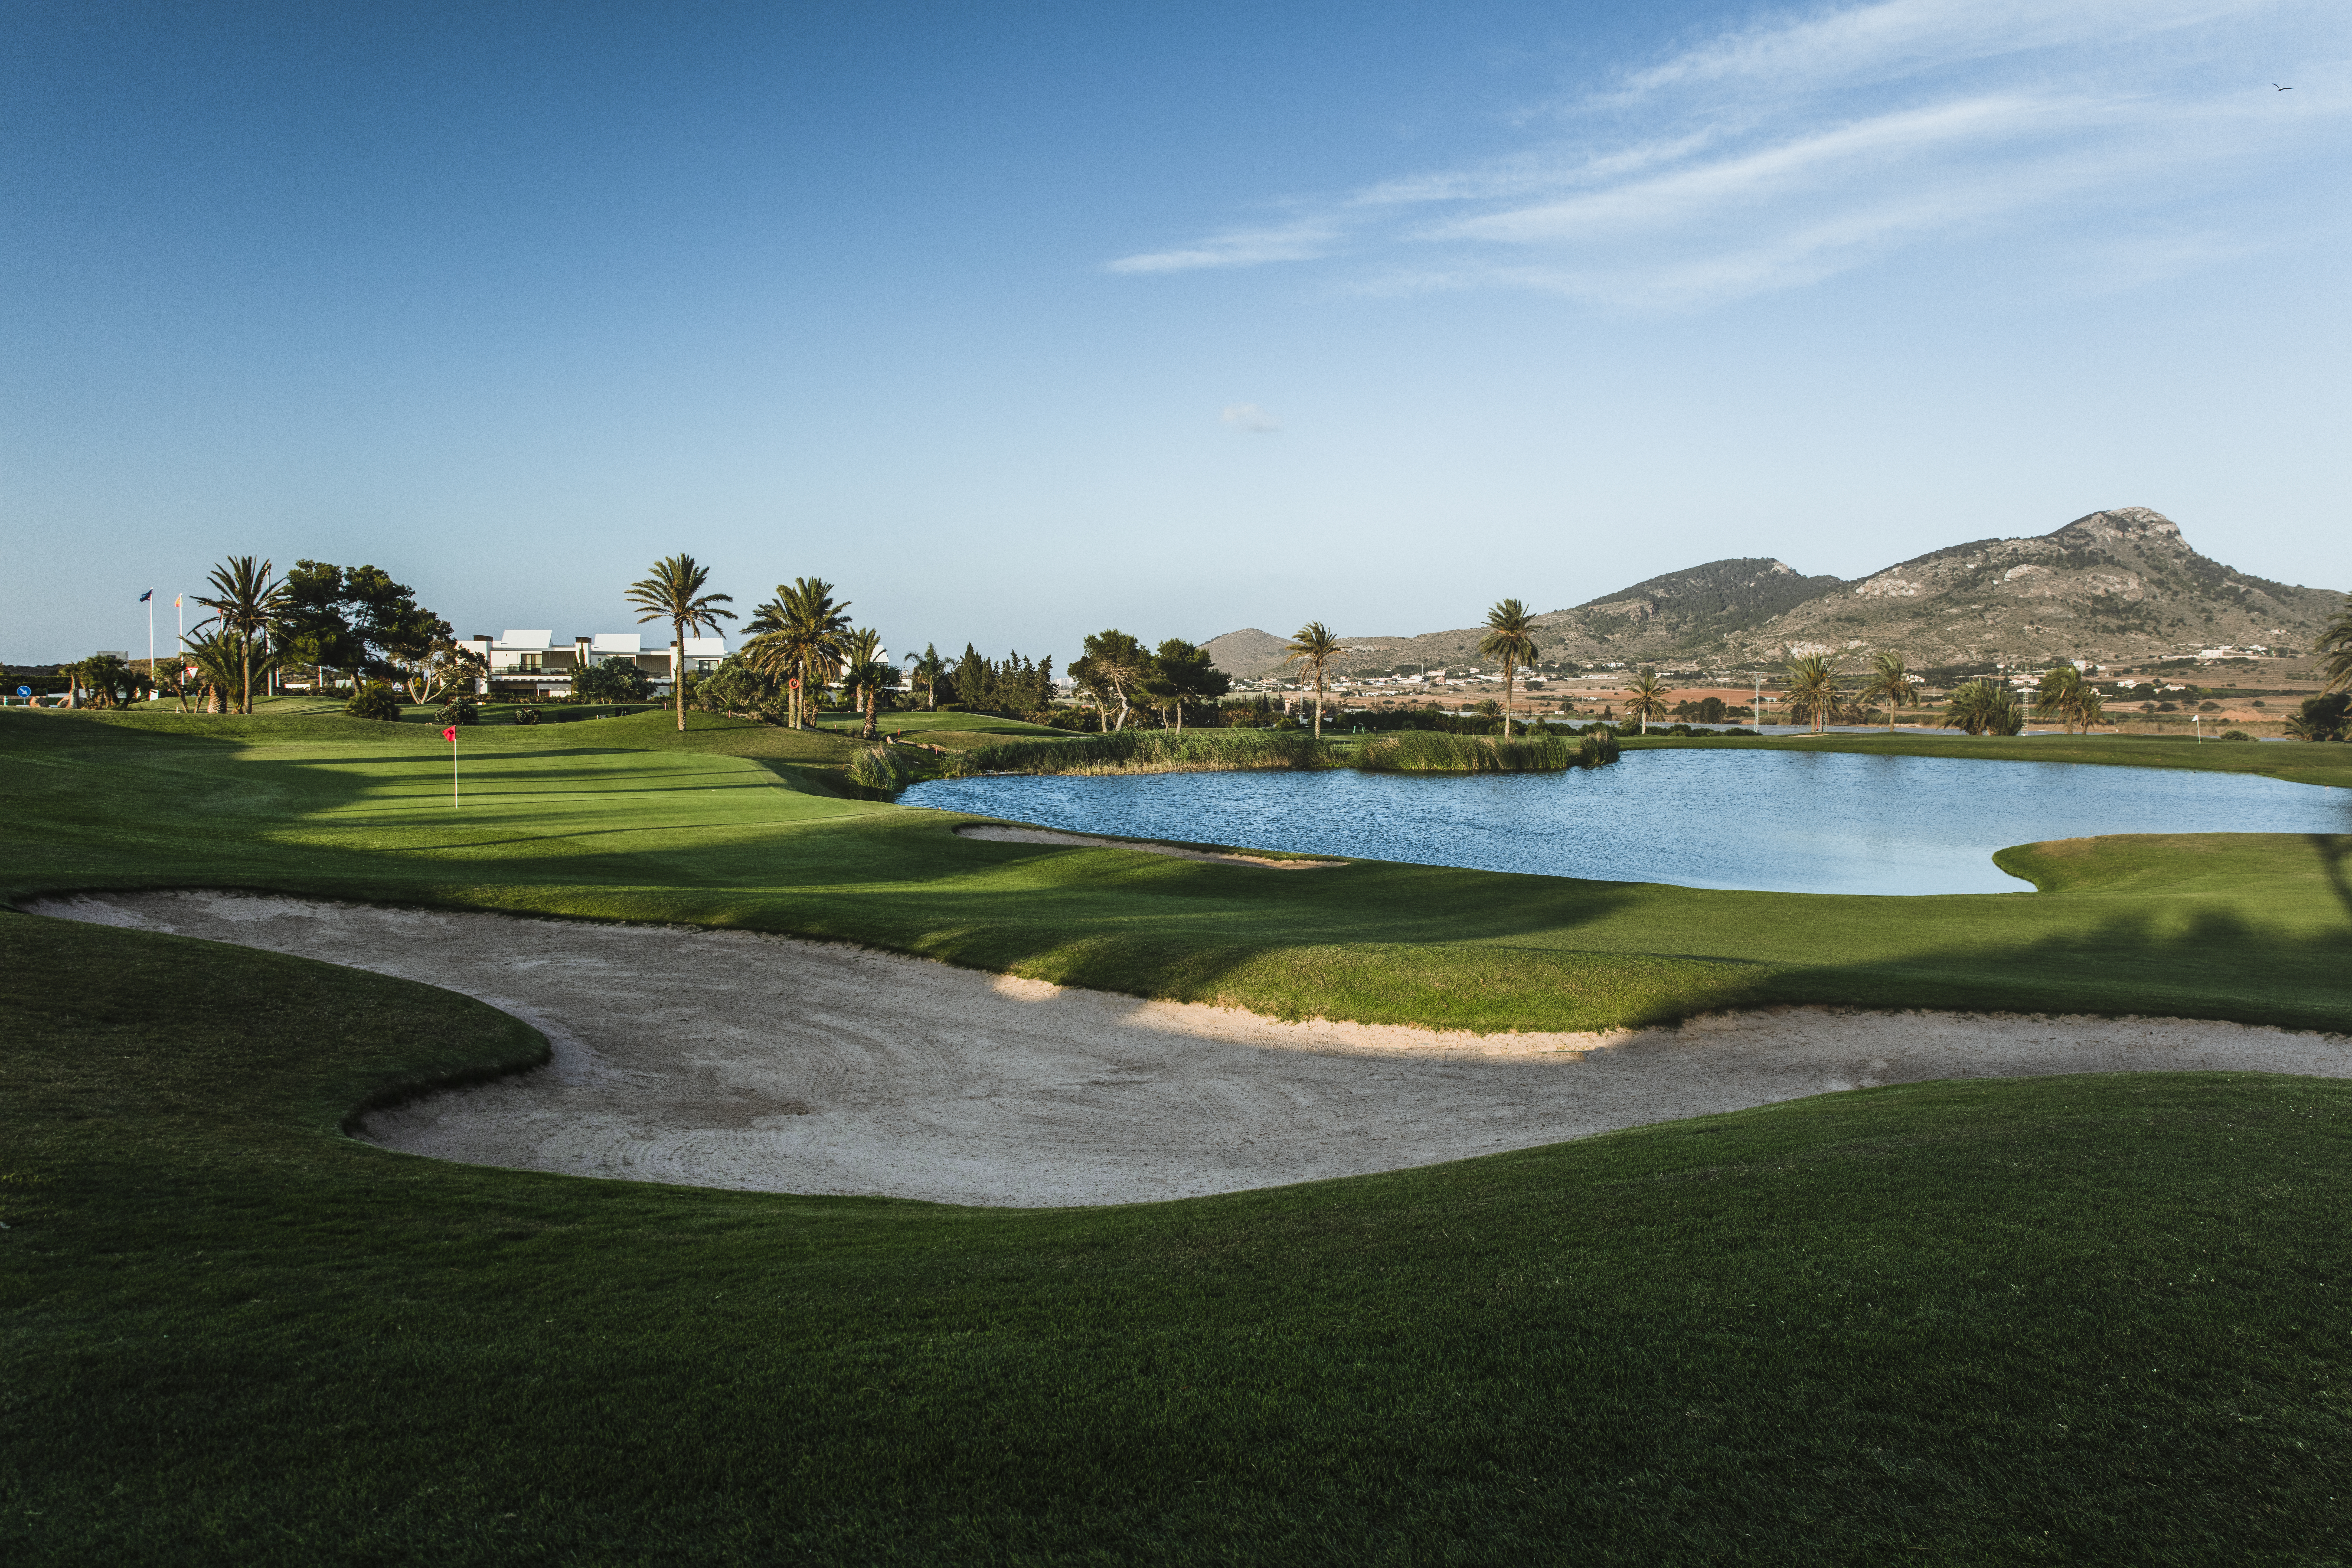 La Manga Club bought by Hesperia Investment Group